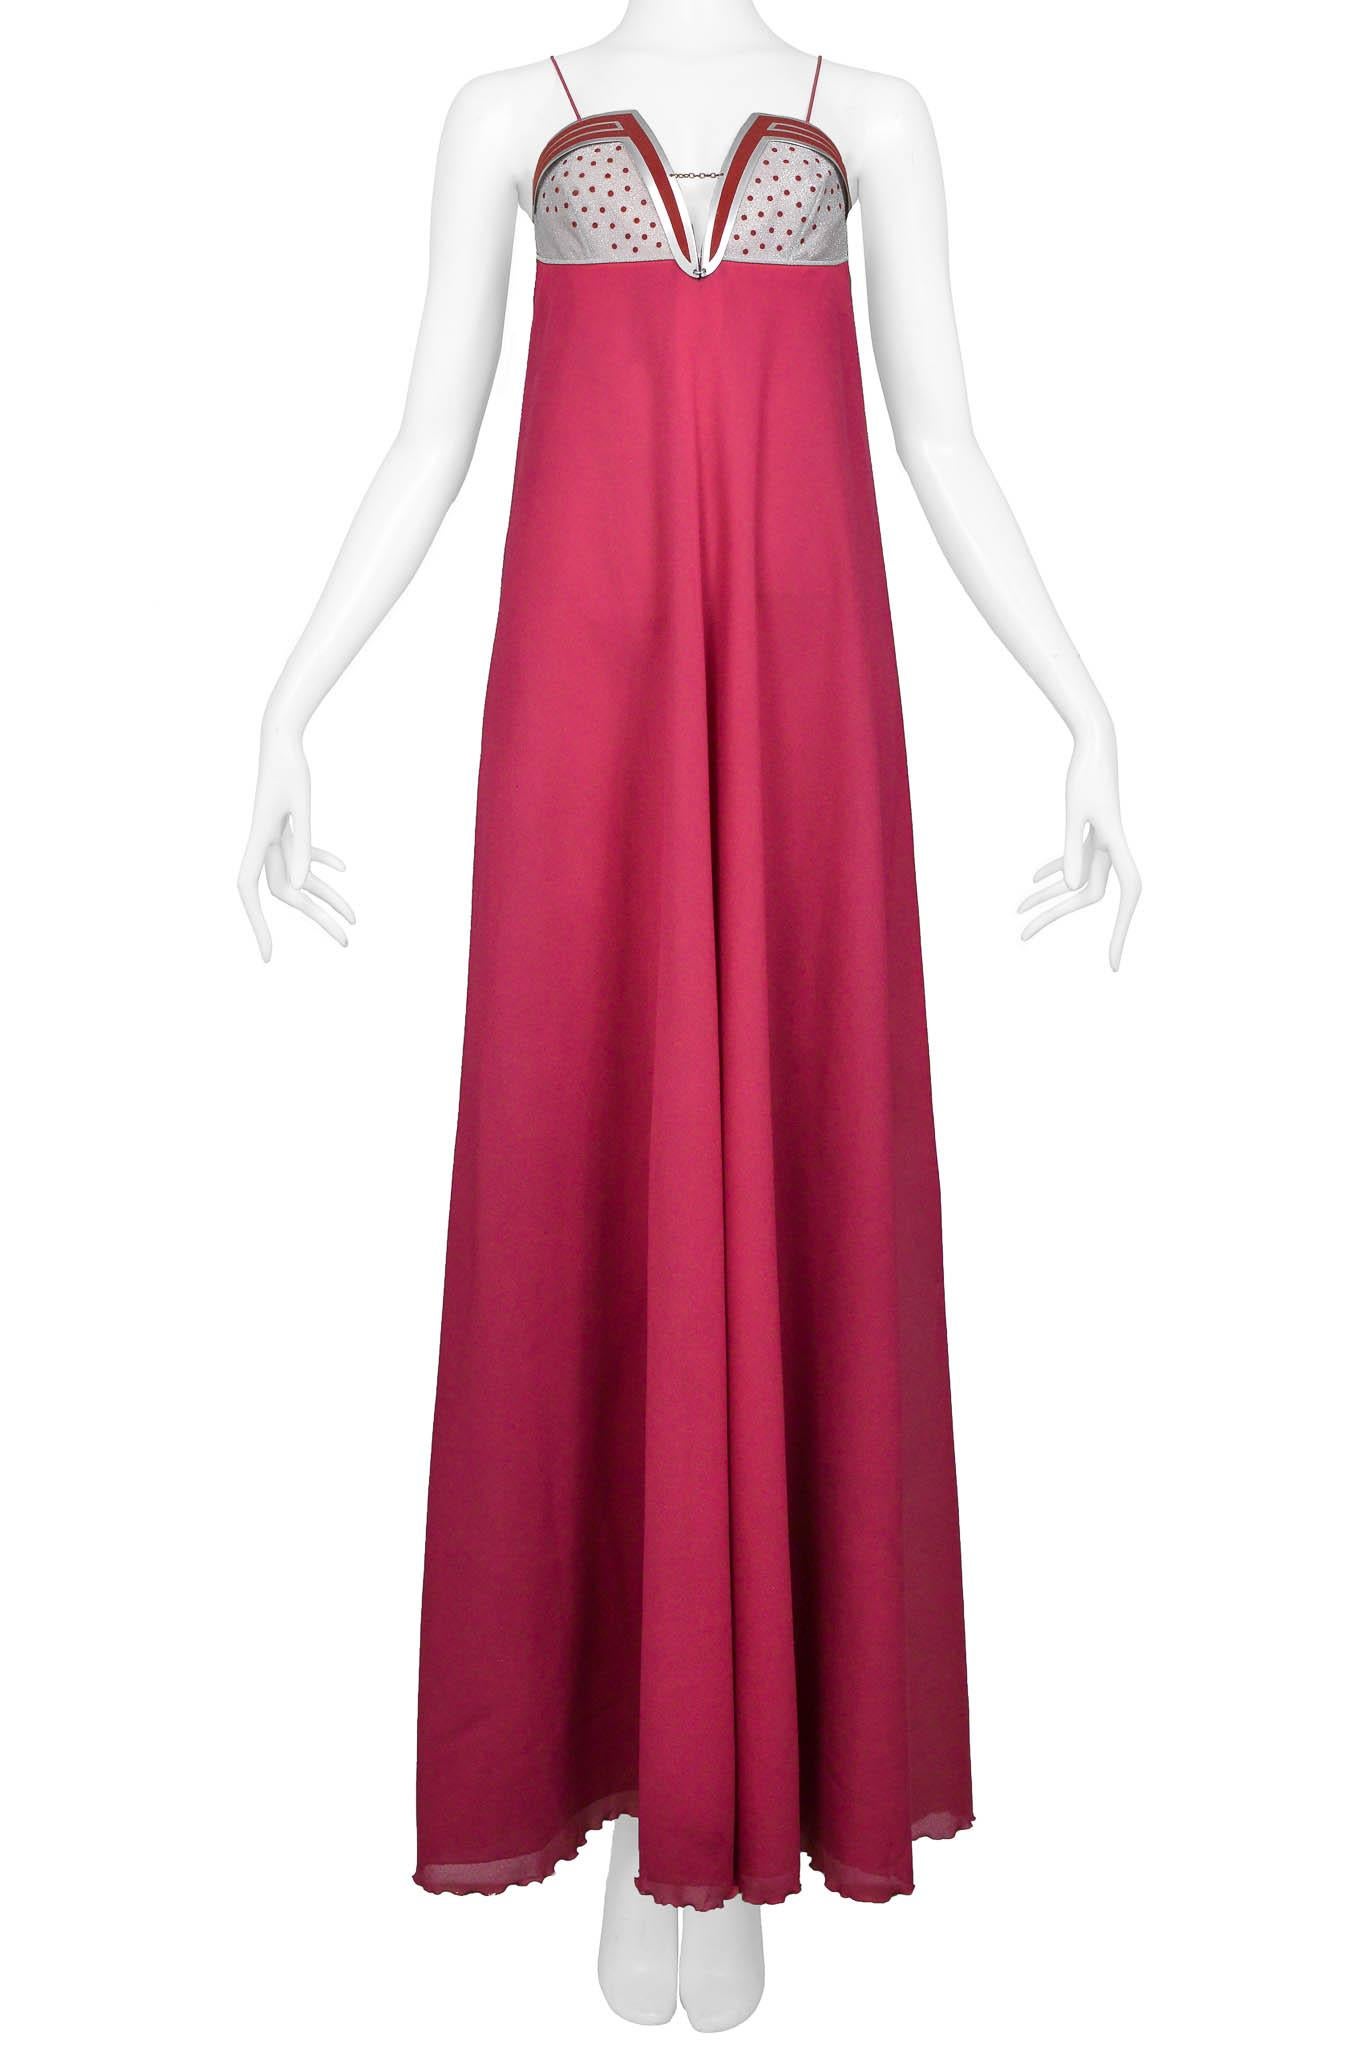 Jacques Cassia Pink Gown With Metal Details In Excellent Condition For Sale In Los Angeles, CA